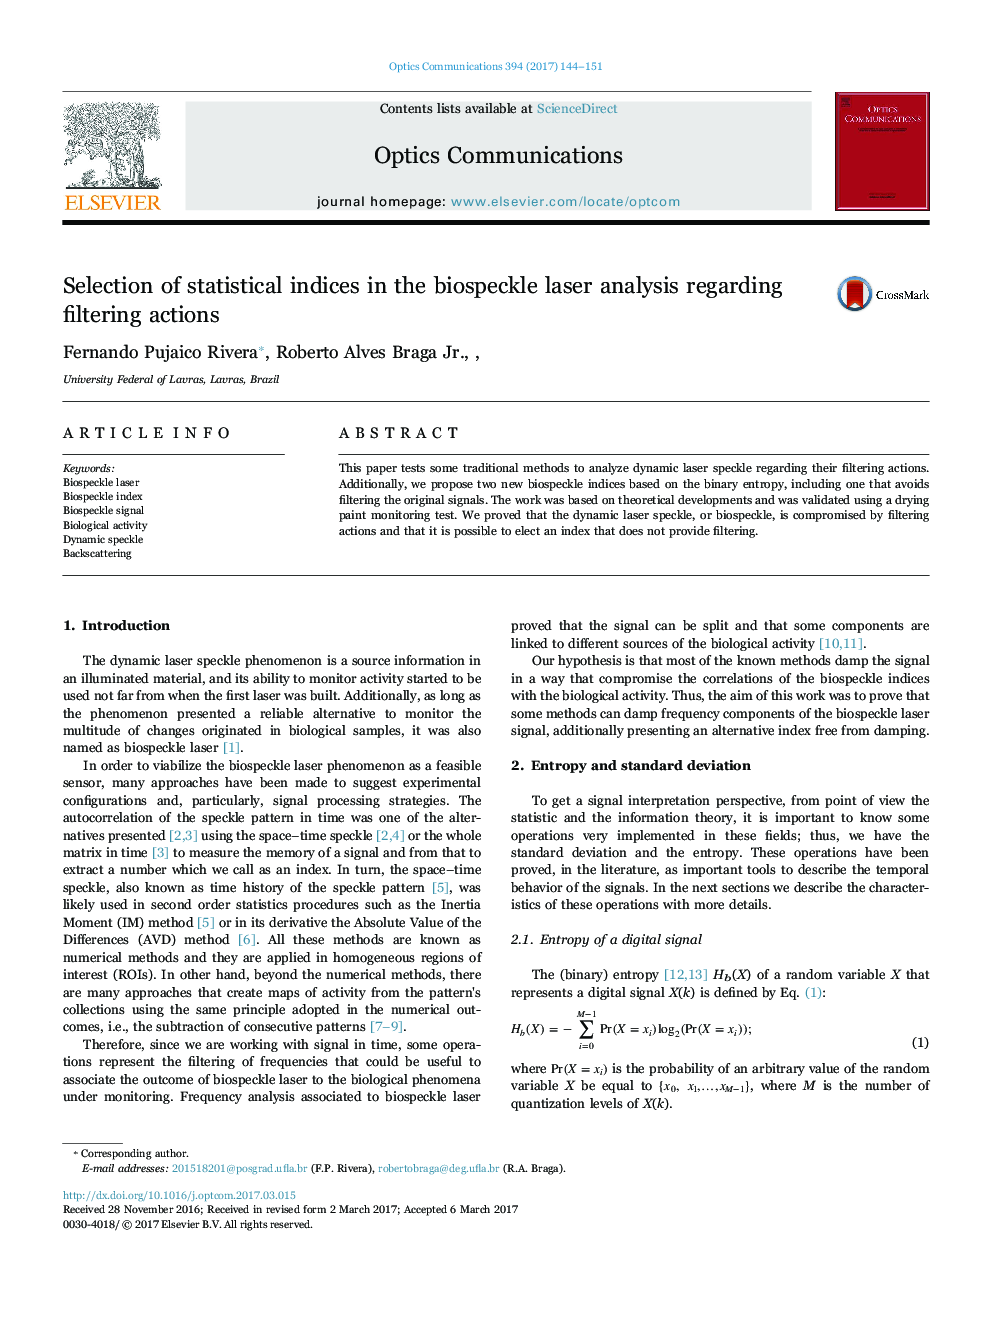 Selection of statistical indices in the biospeckle laser analysis regarding filtering actions